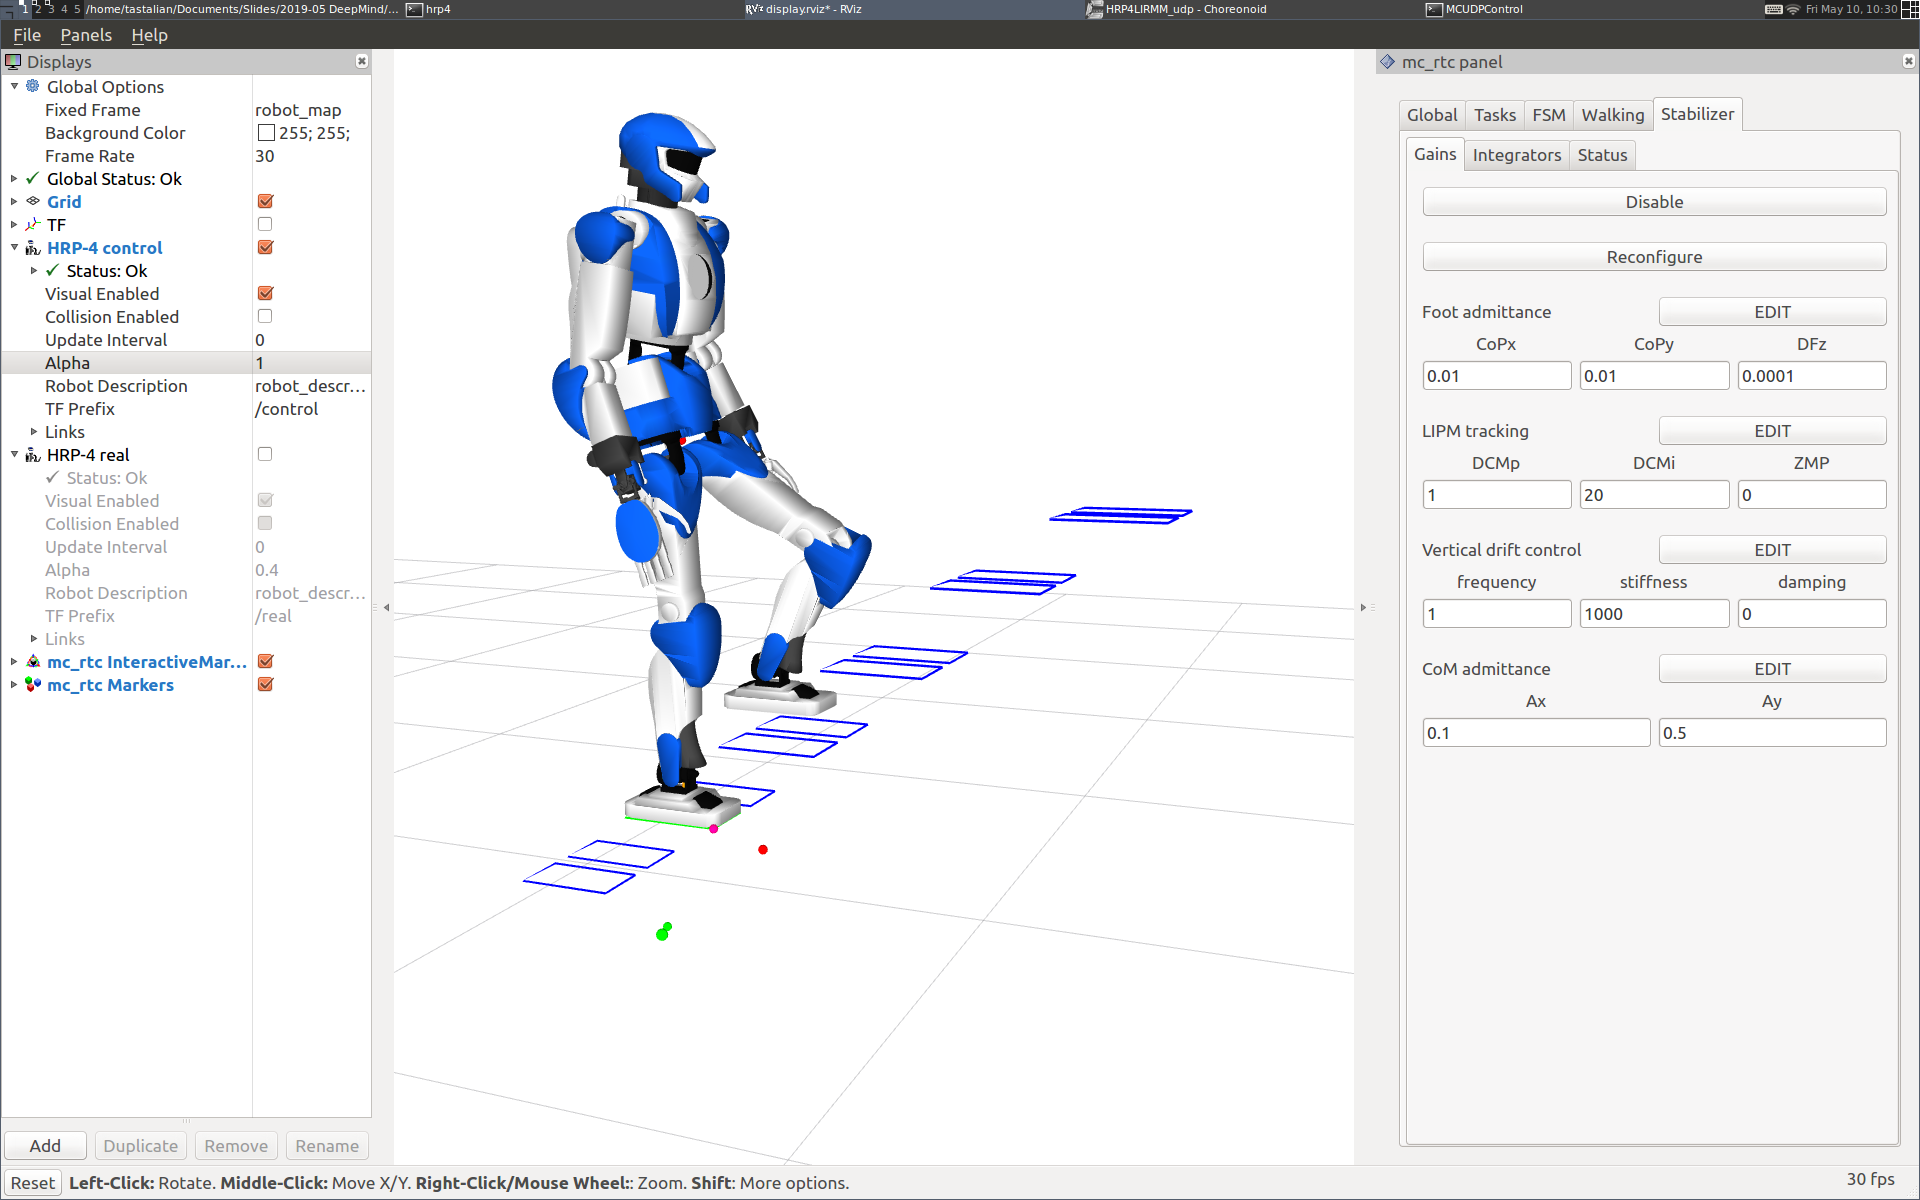 Visualization of the LIPM walking controller on the HRP-4 humanoid robot